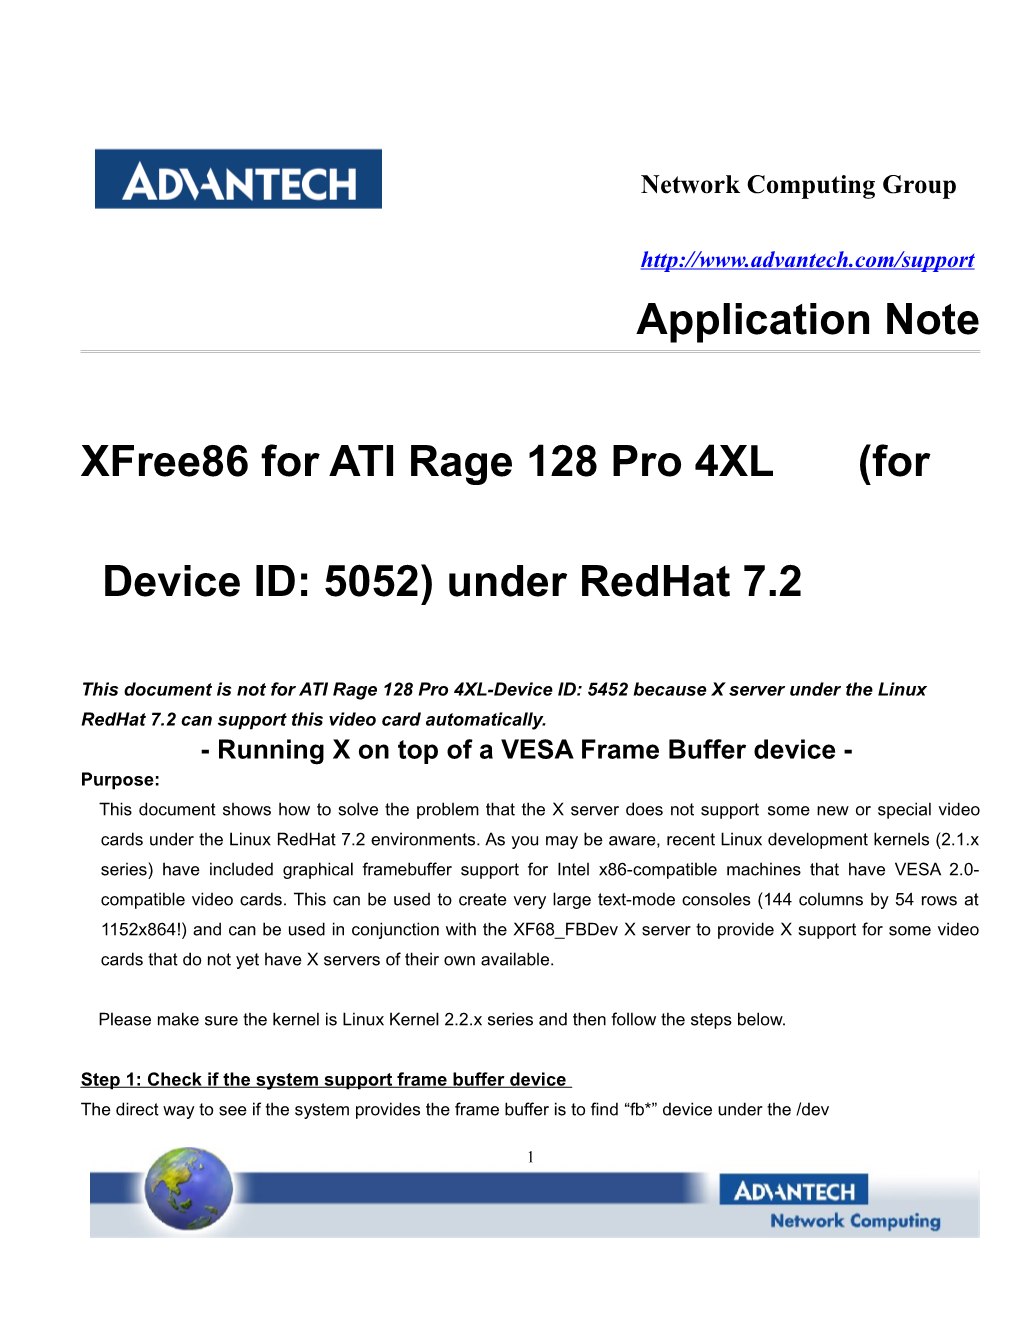 Xfree86 for ATI Rage 128 Pro 4XL (For Device ID: 5052) Under Redhat 7.2